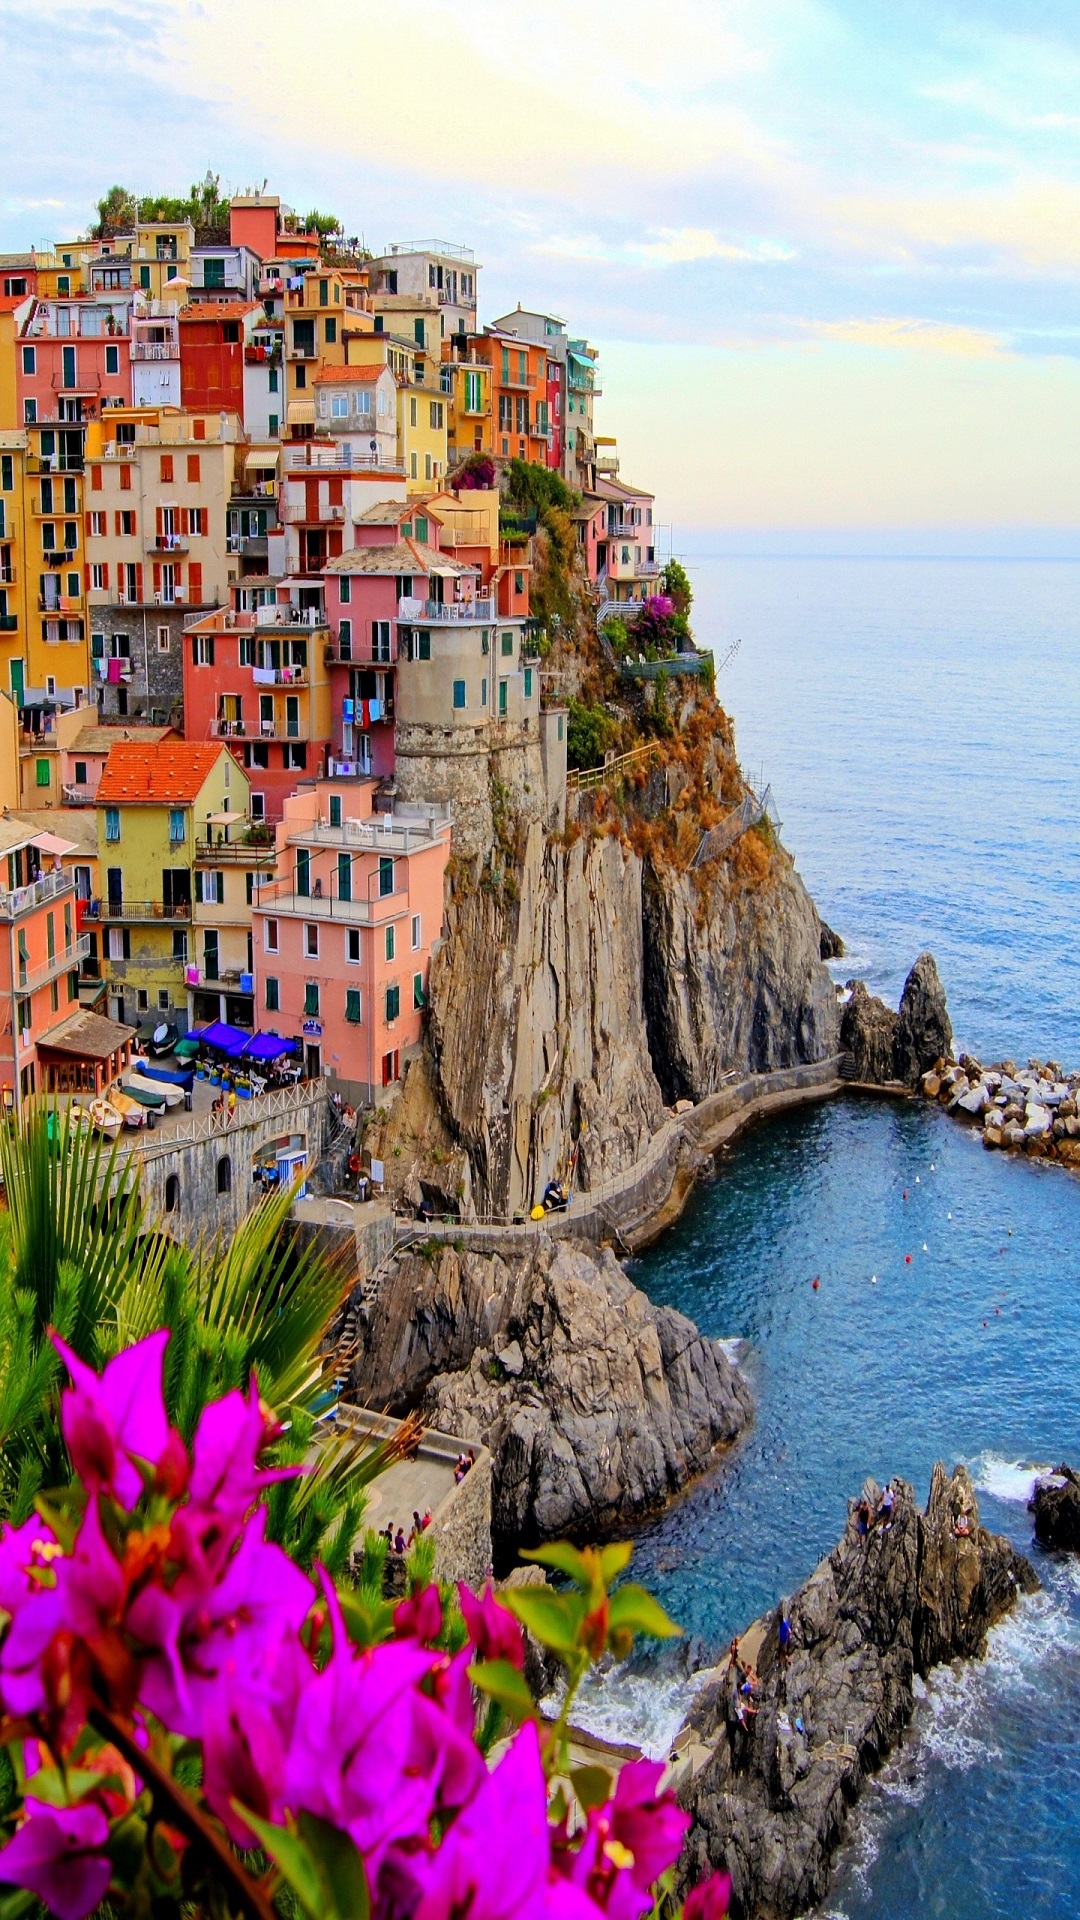 Manarola Itlay for Apple iPhone 6S & 7 Plus resolution